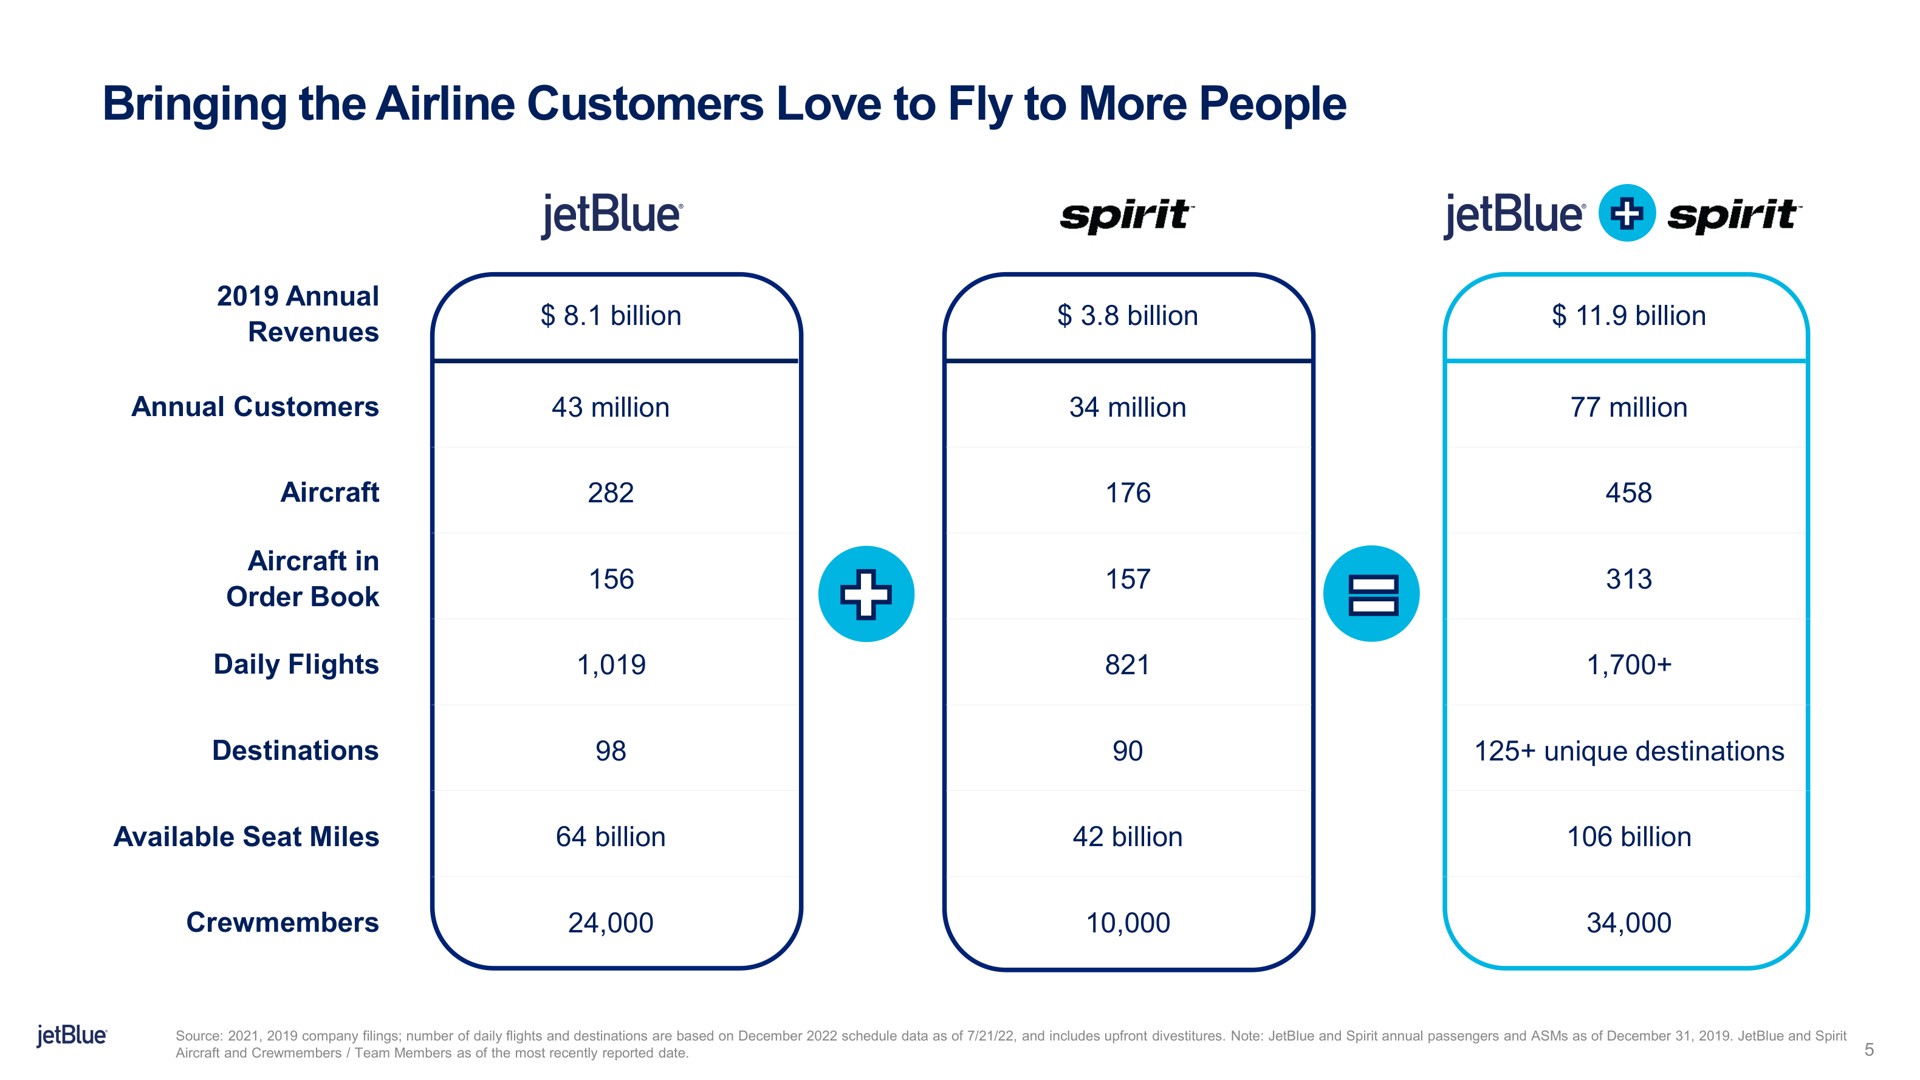 bringing the customers love to fly to more people spirit spirit | jetBlue